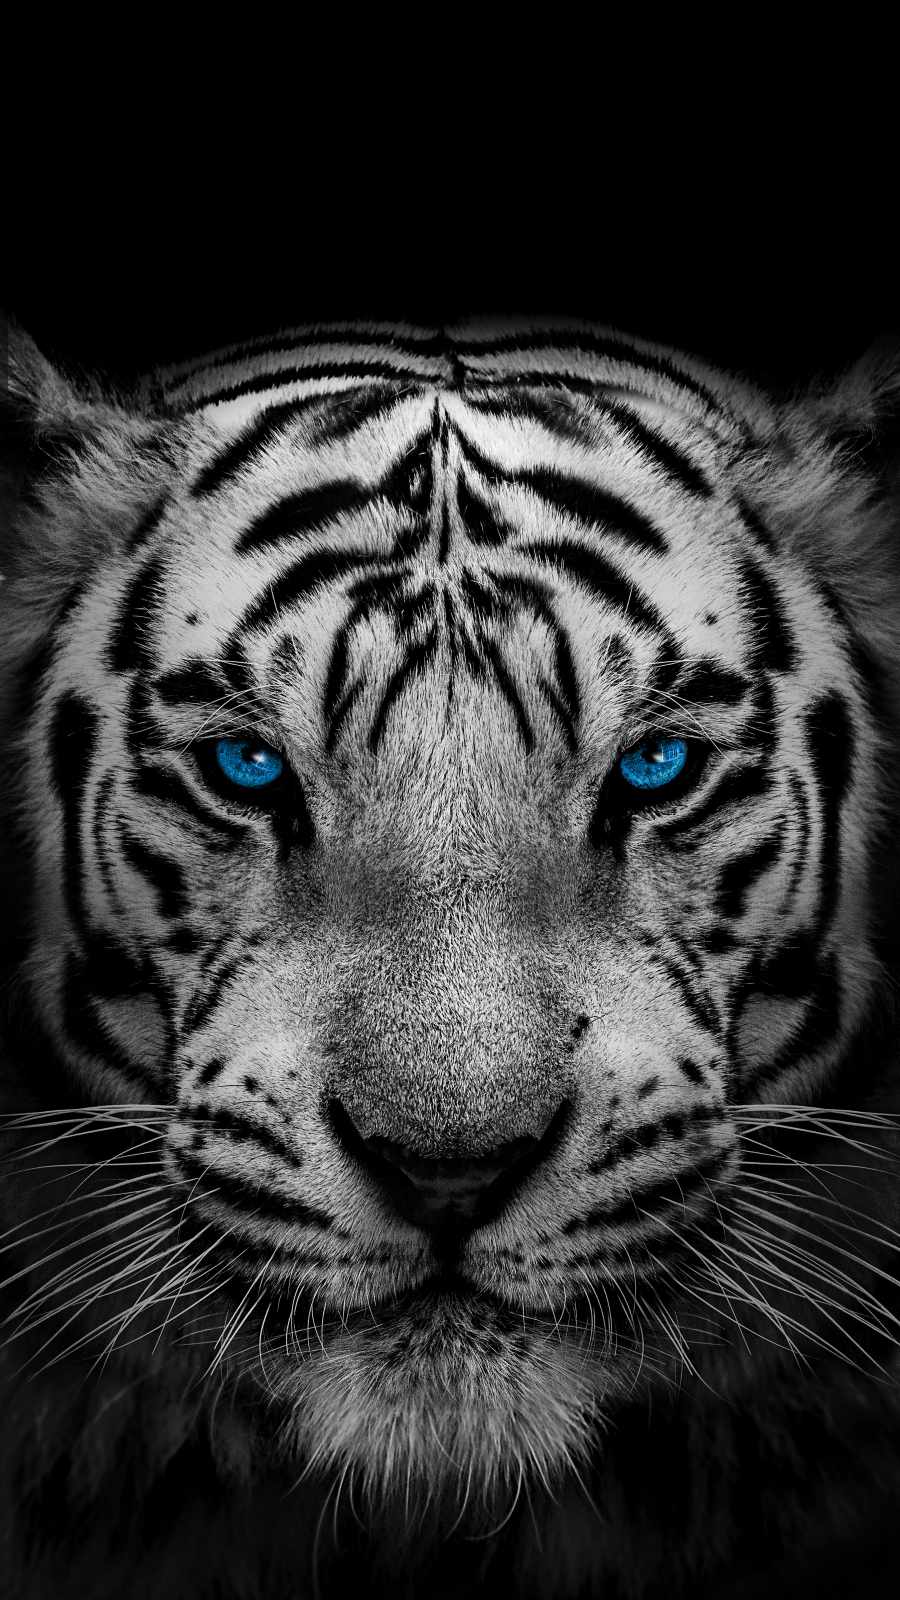 White Tiger IPhone Wallpaper - IPhone Wallpapers : iPhone Wallpapers